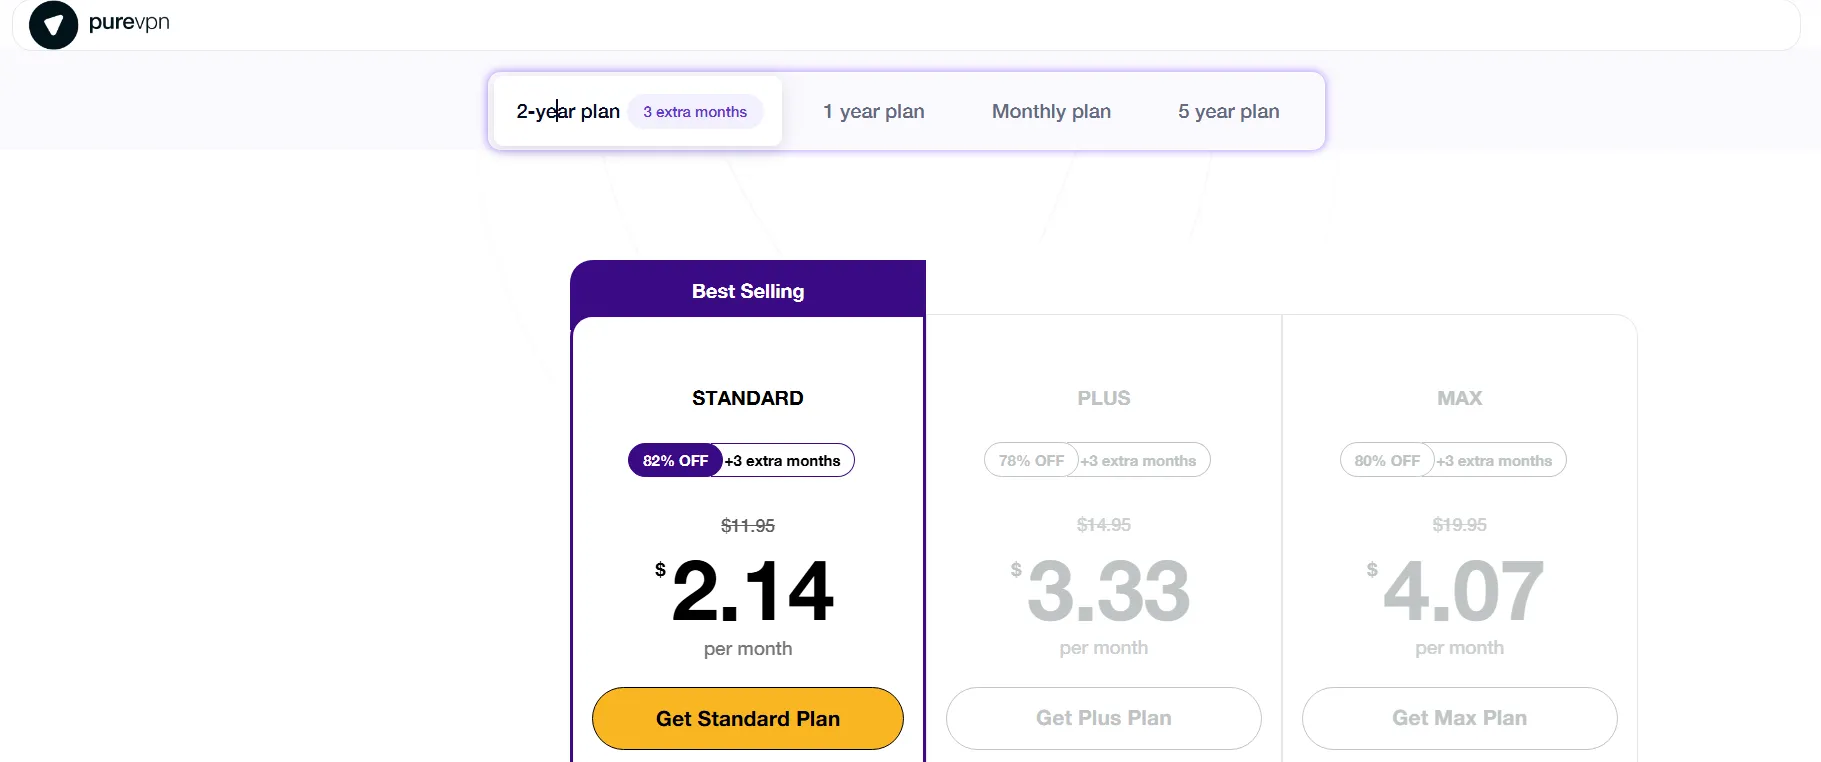 PureVPN 2-year Pricing Plans